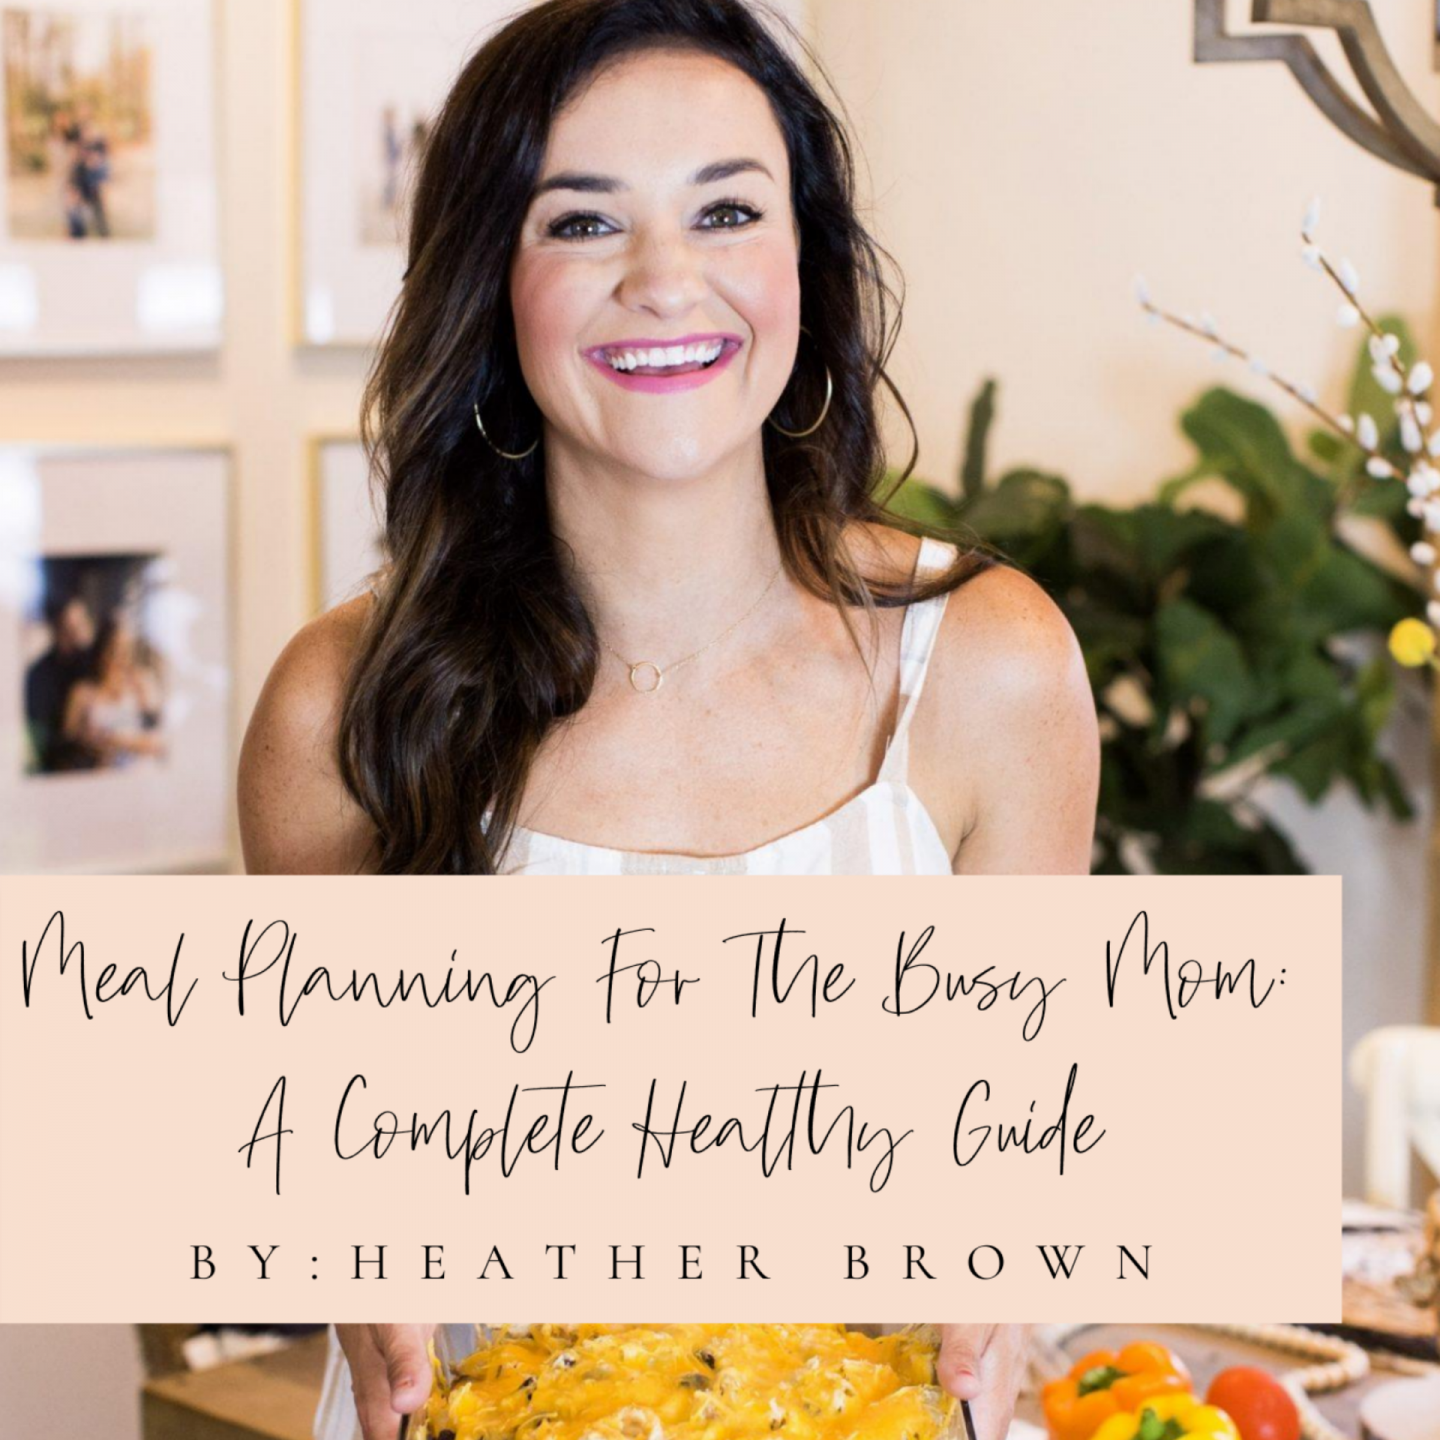 Meal Planning for the Busy Mom eBook